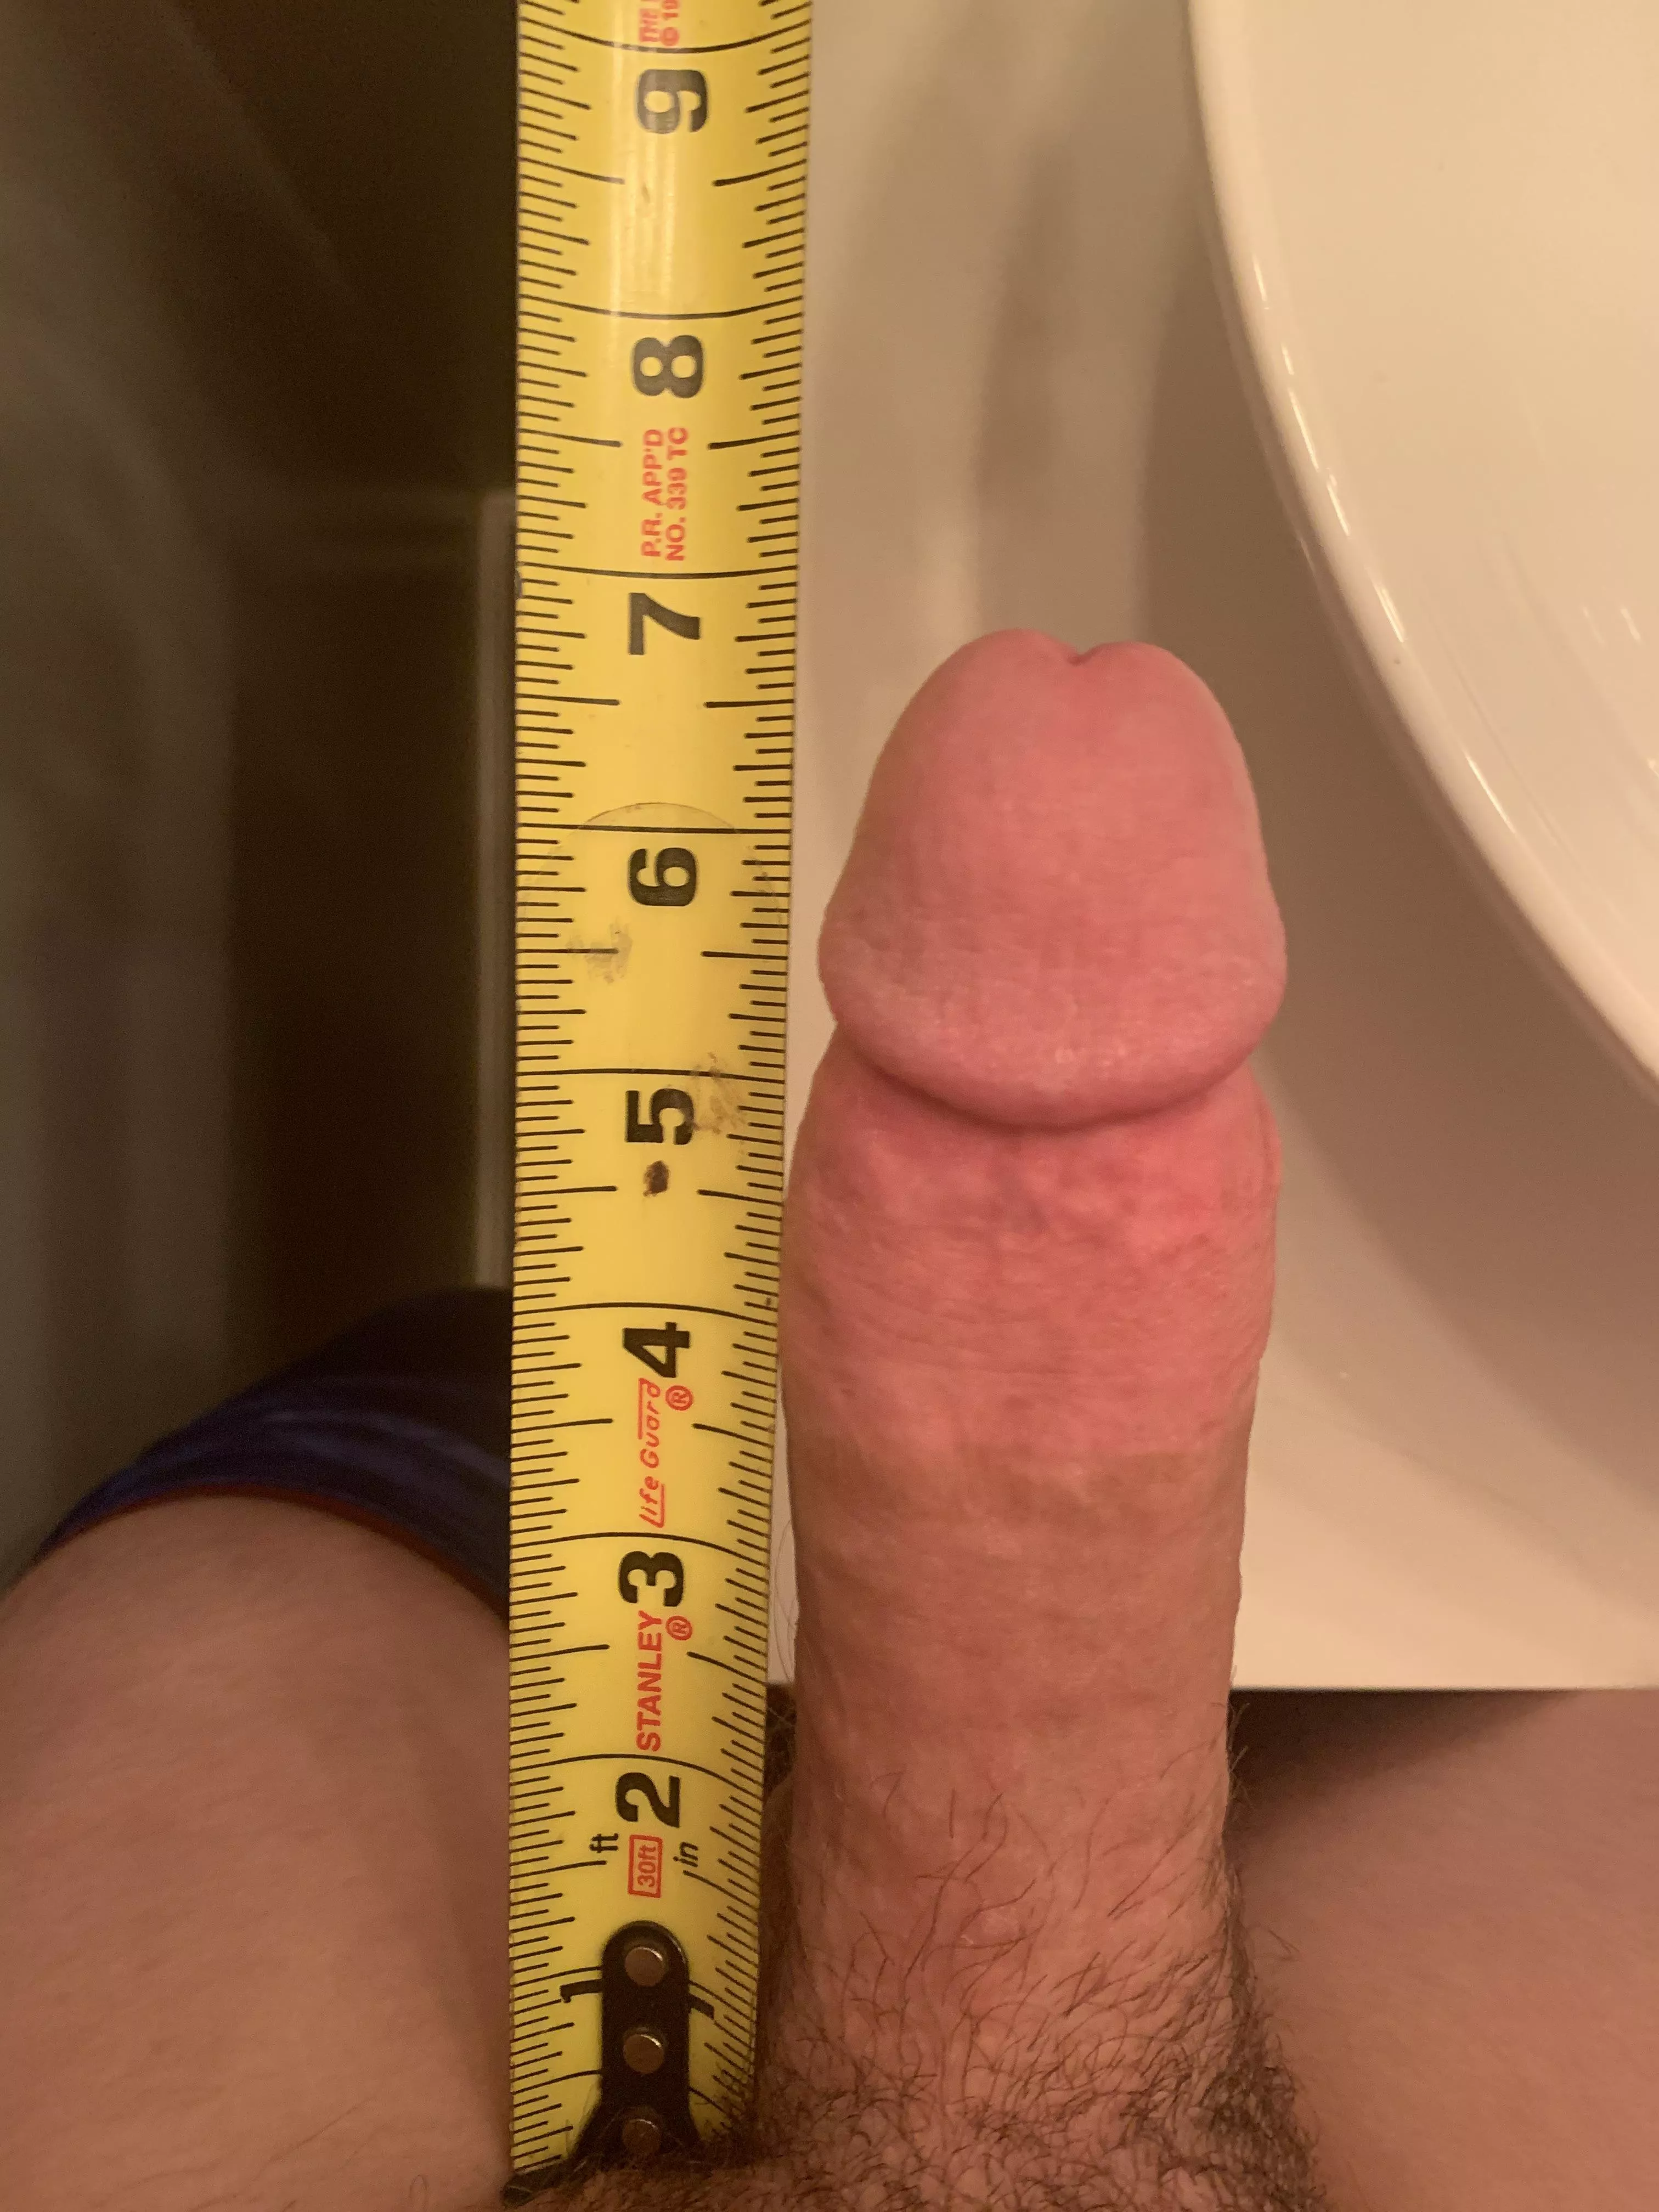 I have a 4.7 inch dick